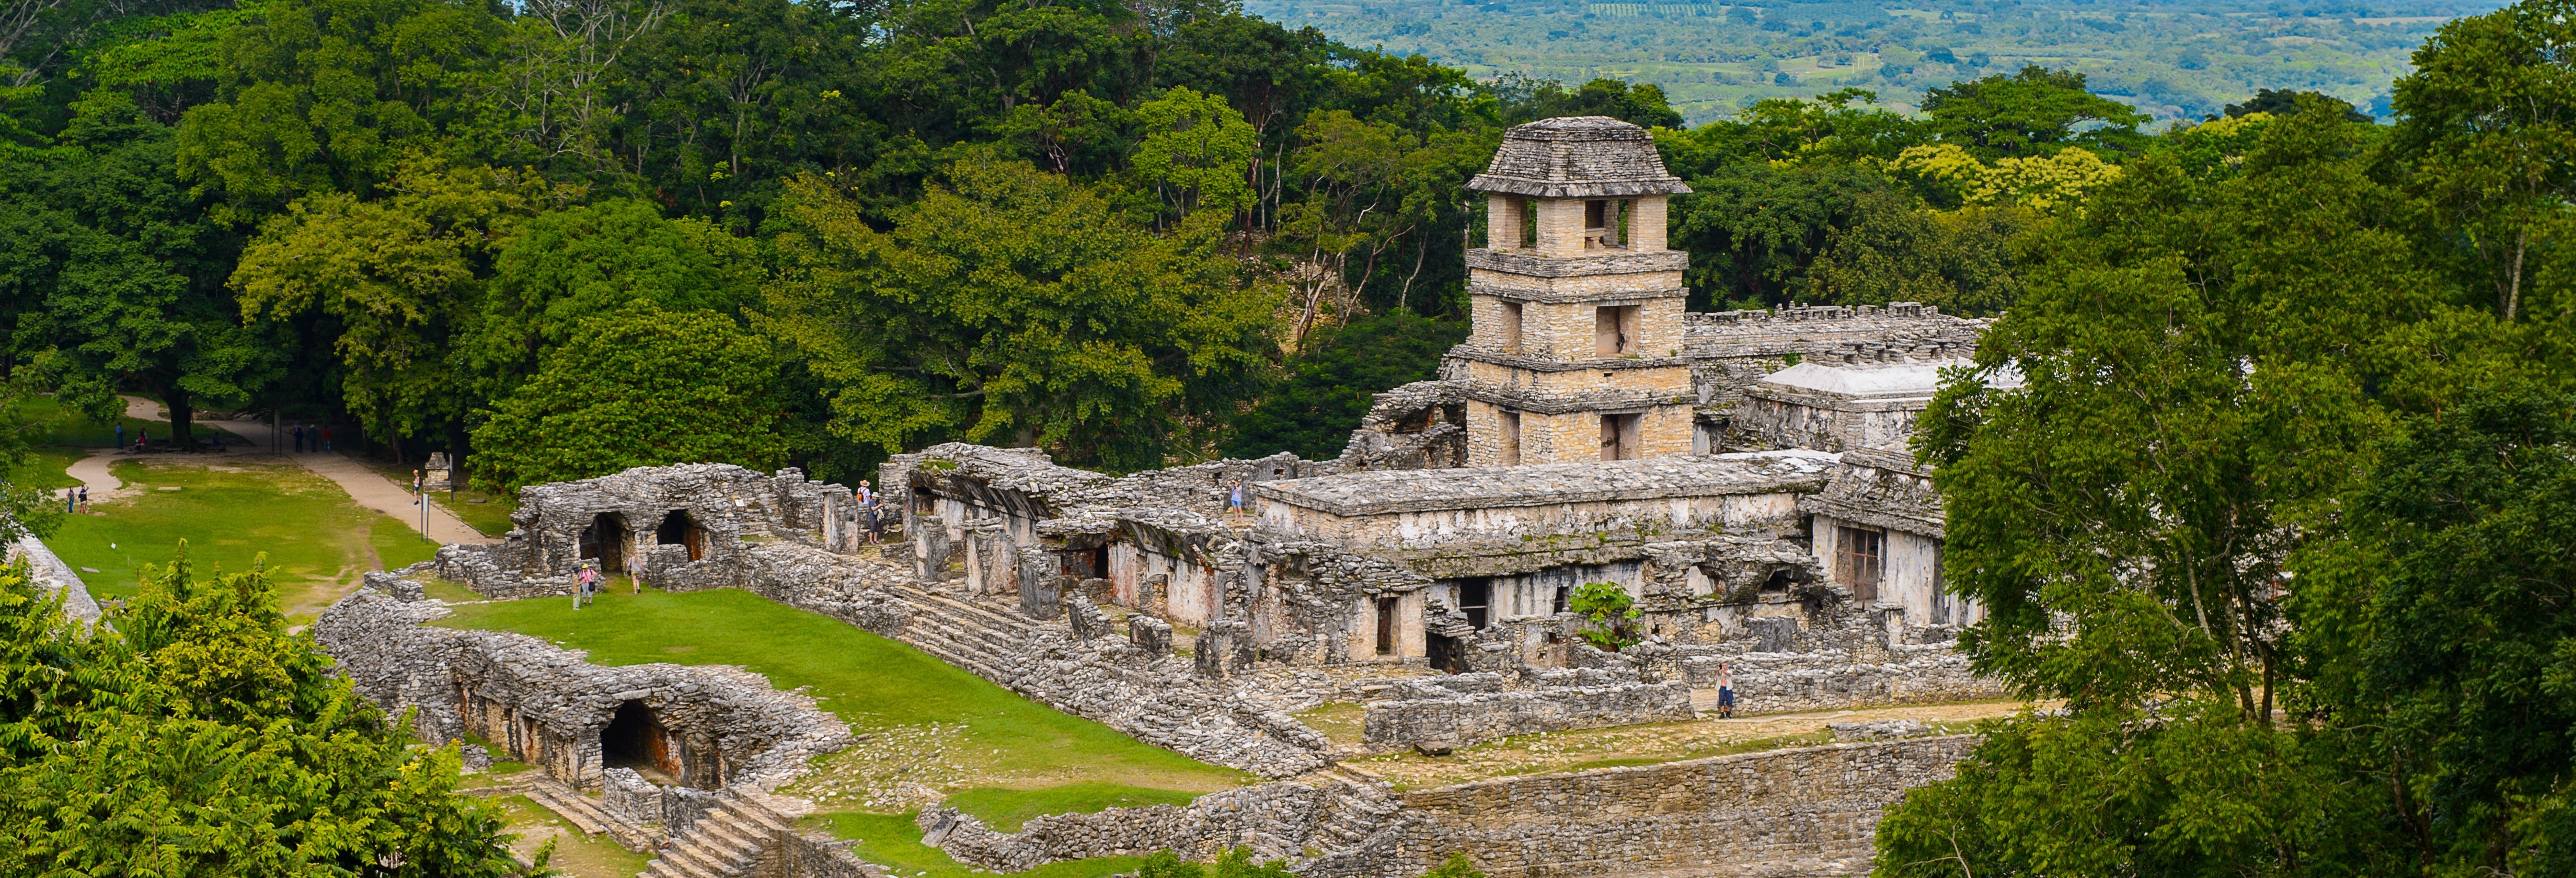 Archaeological Site of Palenque Ticket